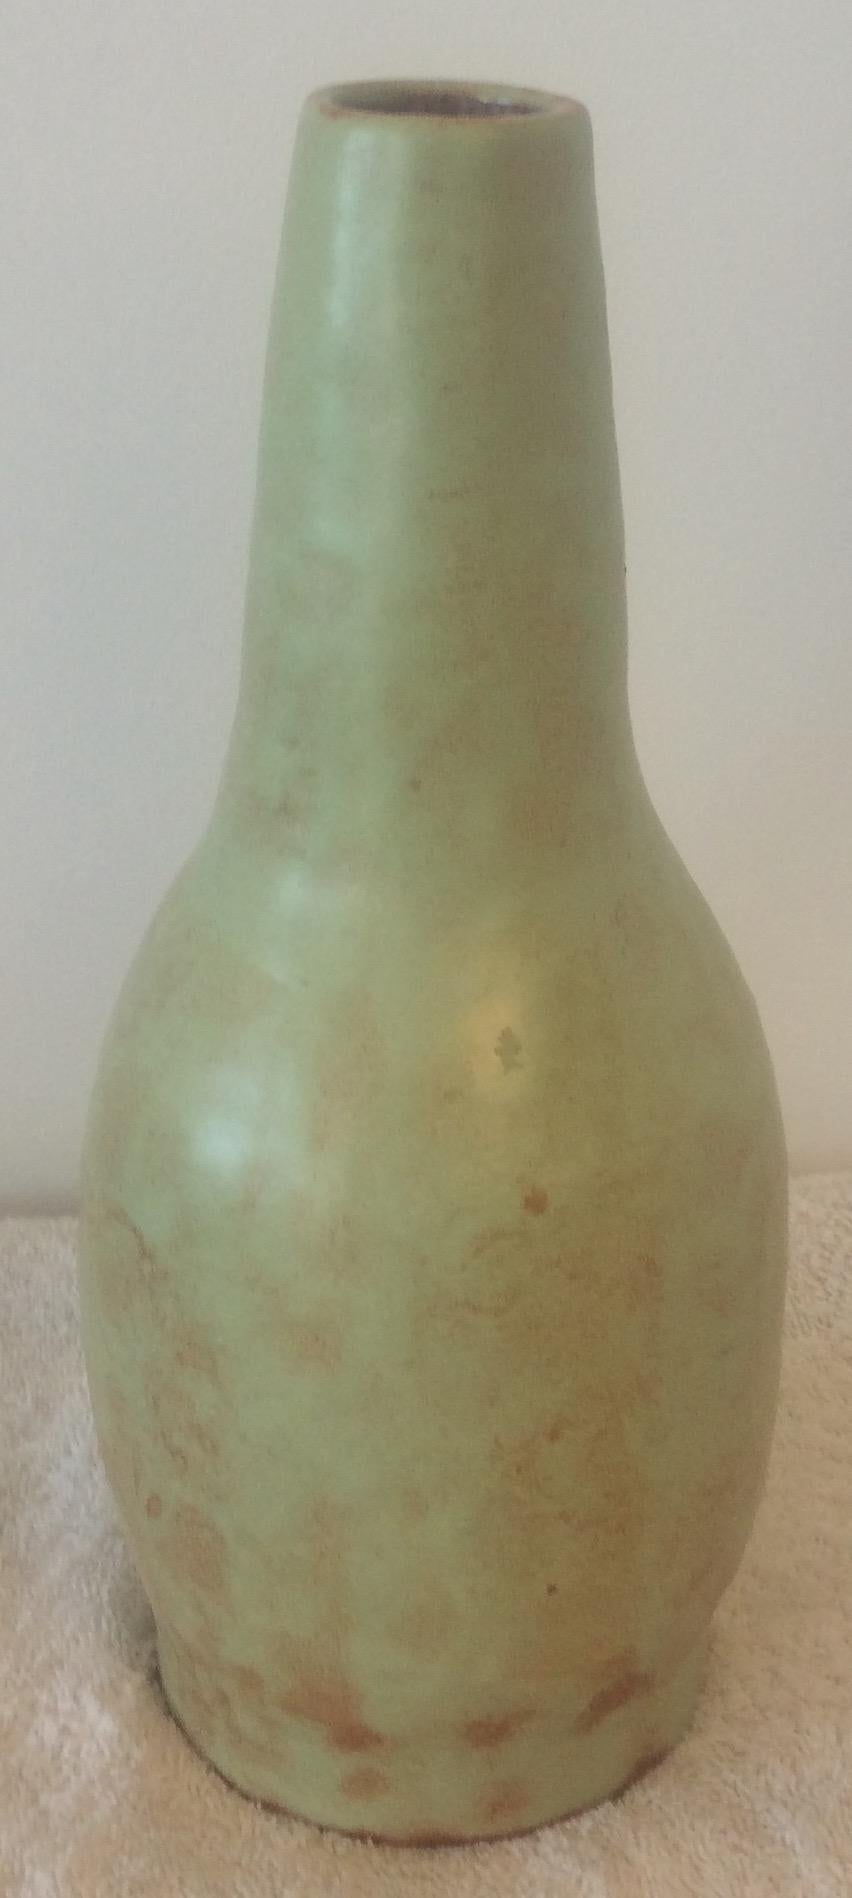 This dazzling glazed ceramic vase was handcrafted in Vallauris, France.
The primary pale green with terracotta colors are truly eye-catching. 

It can enhance any shelf, table, credenza or countertop as it is truly an interesting decorative